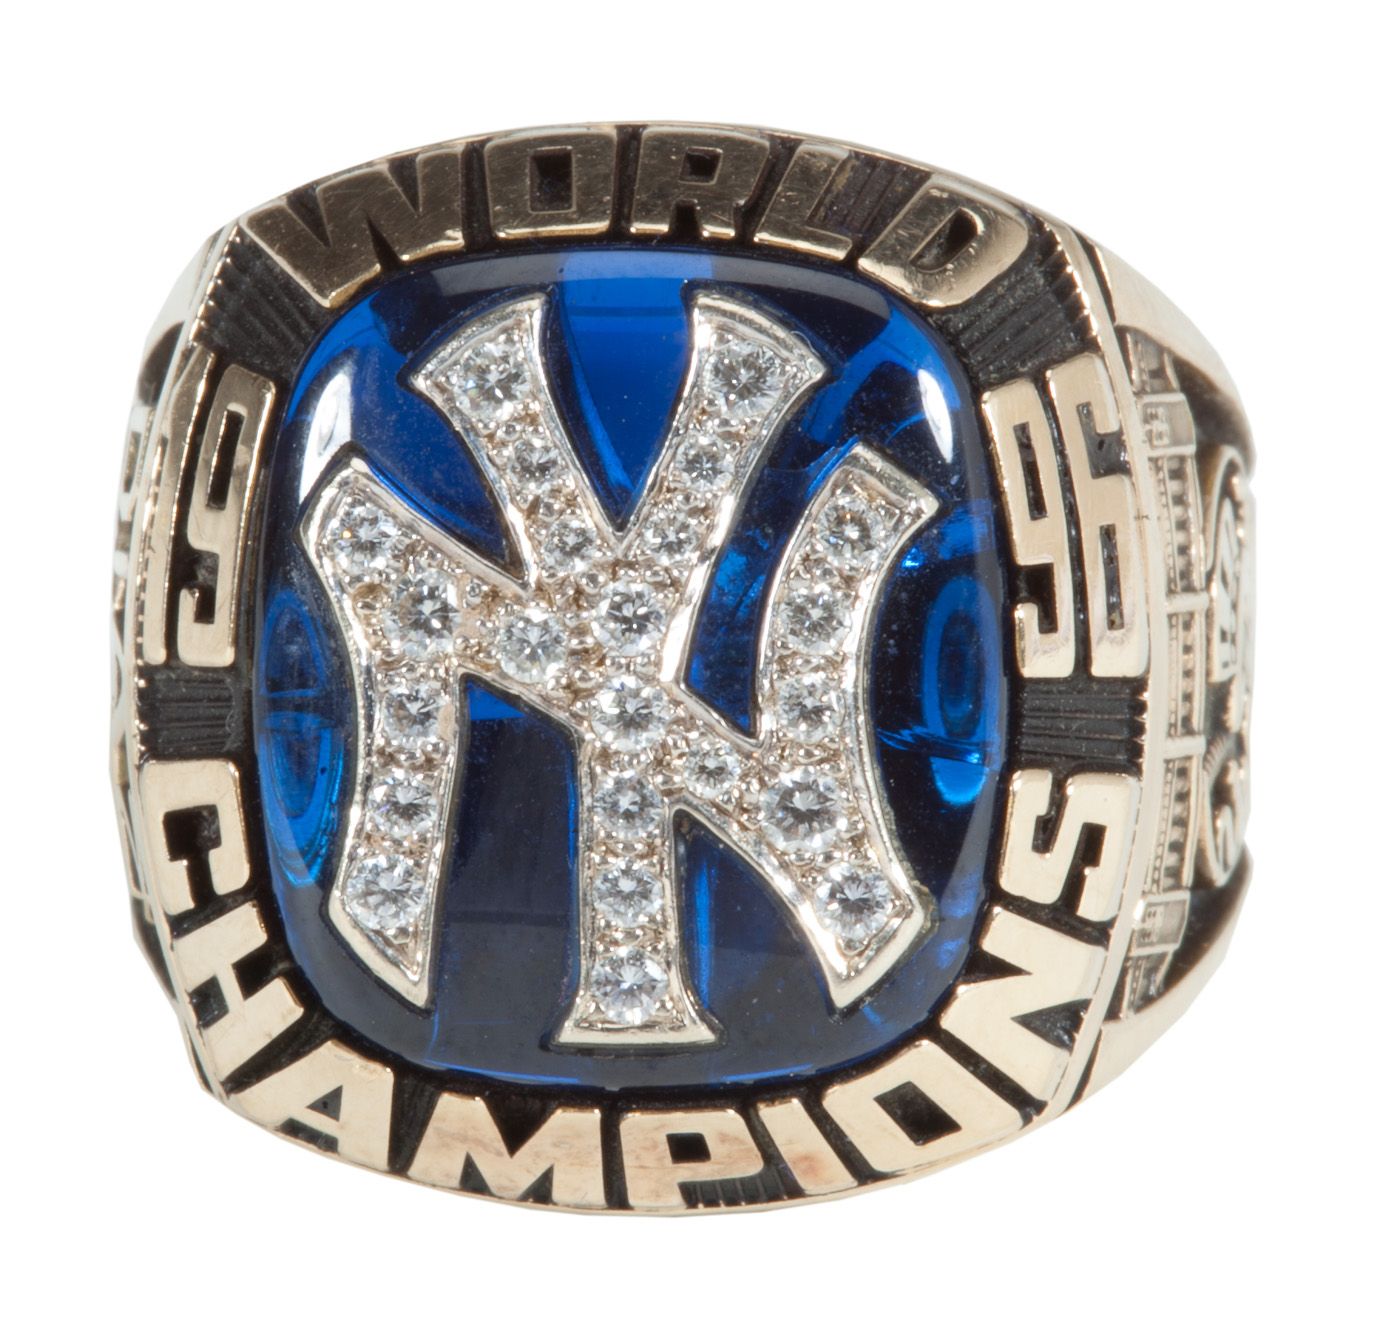 1996 NEW YORK YANKEES WORLD SERIES CHAMPIONSHIP TROPHY - Buy and Sell  Championship Rings